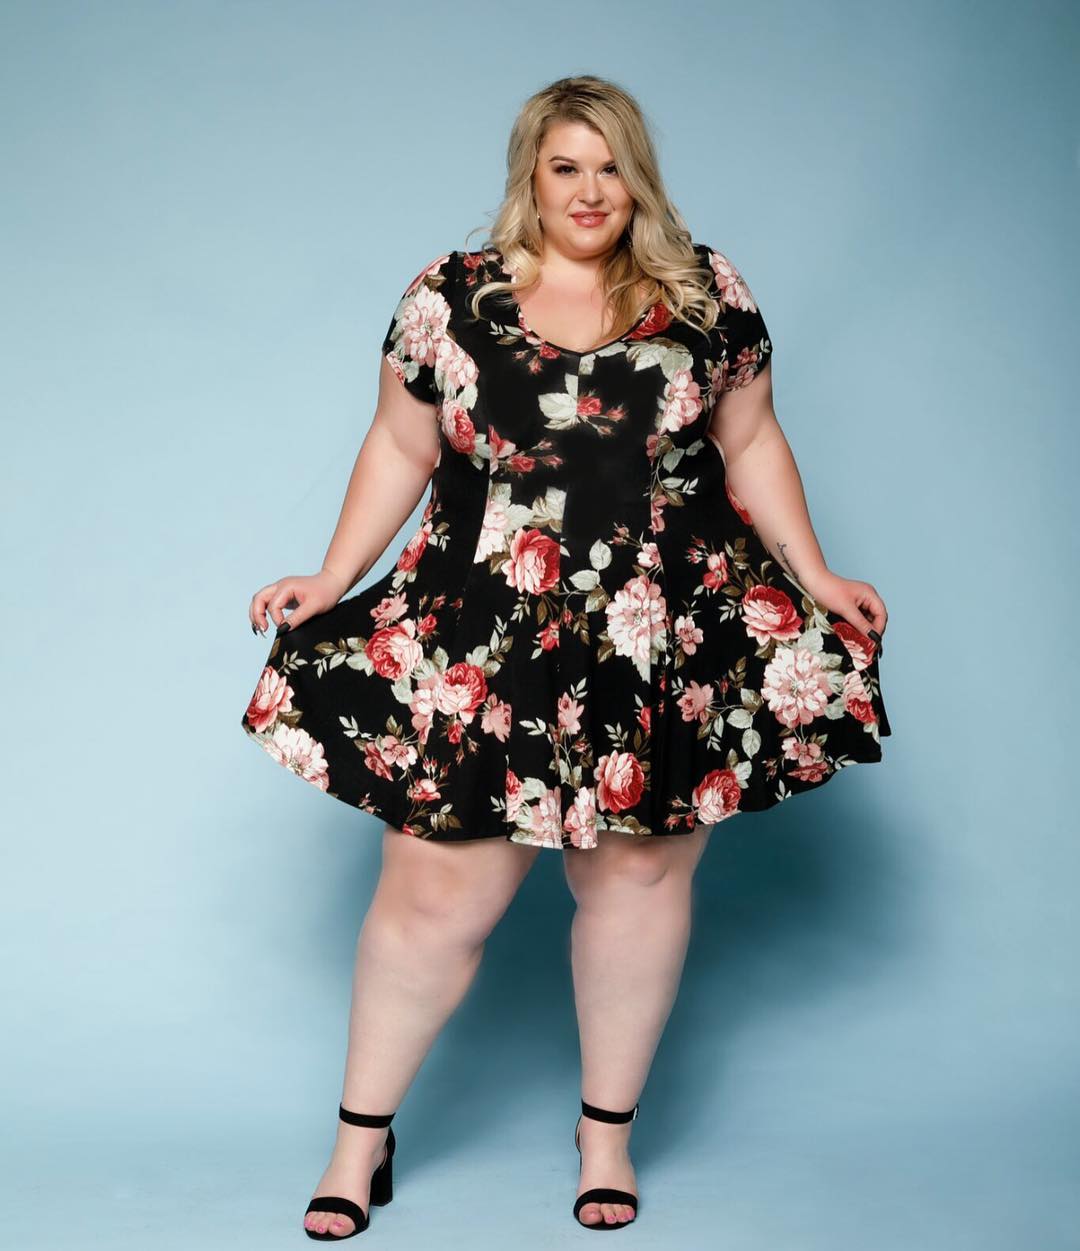 Top 92+ Pictures Pictures Of Plus Size Models Completed